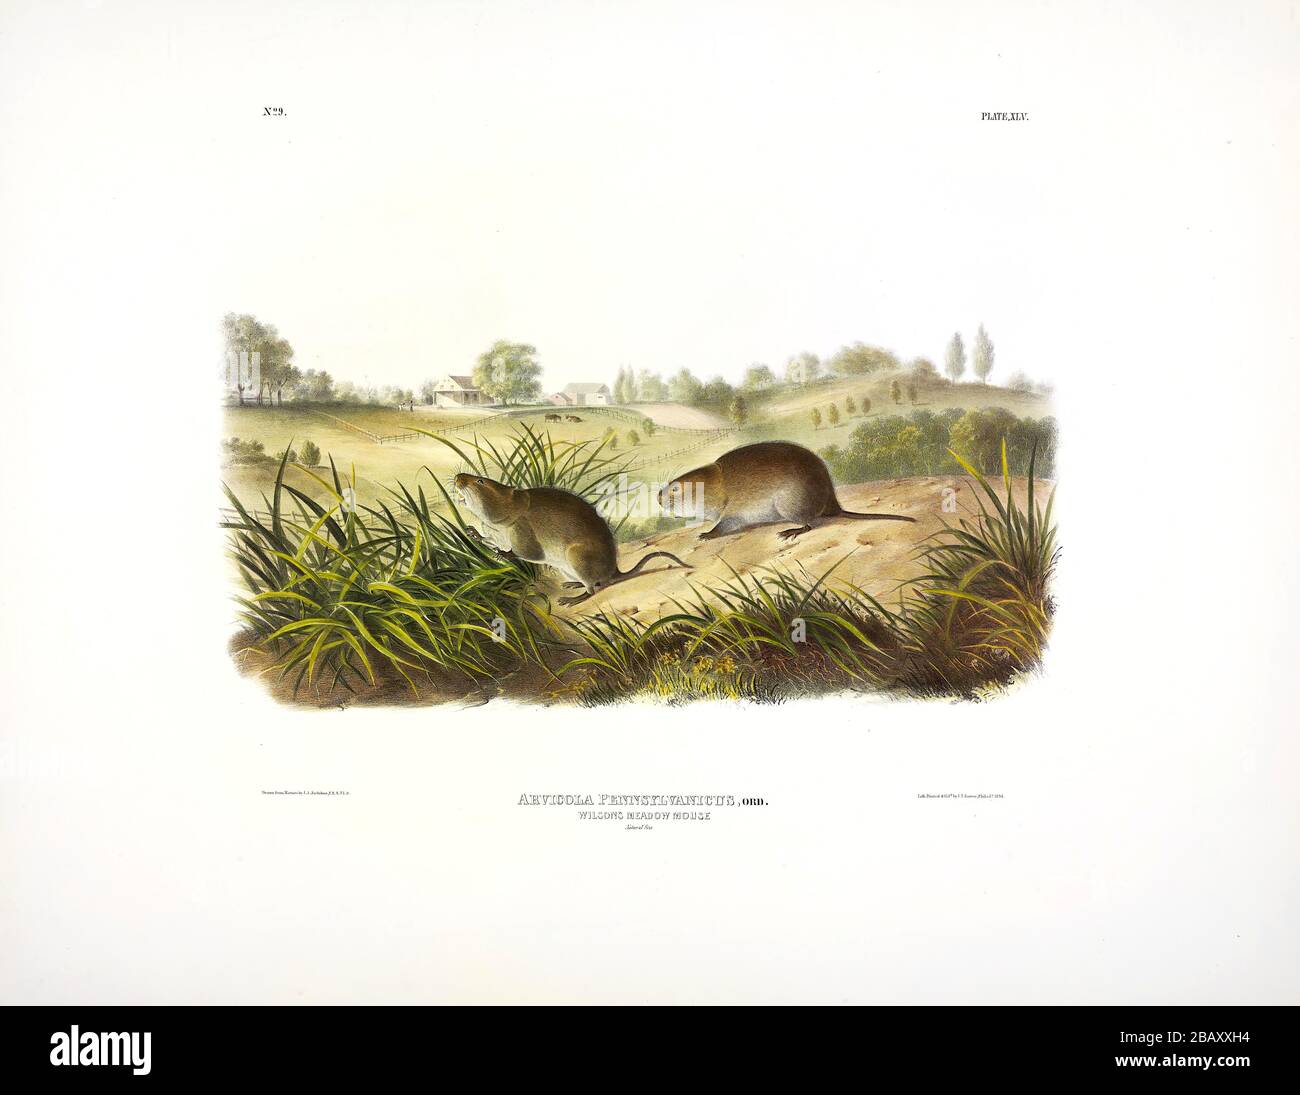 Plate 45 Wilson's Meadow Mouse (Meadow Vole) The Viviparous Quadrupeds of North America, John James Audubon, Very high resolution quality edited image Stock Photo